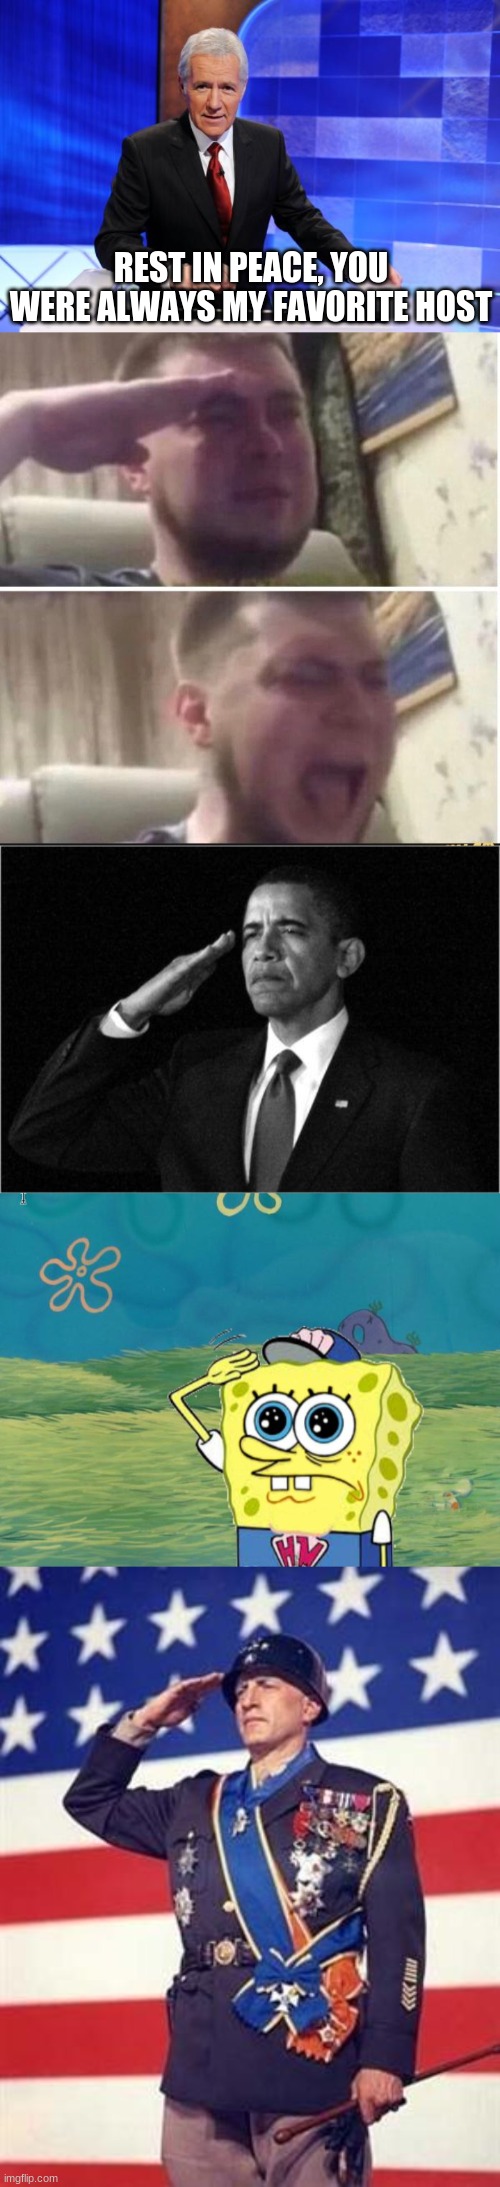 my favorite celebrety |  REST IN PEACE, YOU WERE ALWAYS MY FAVORITE HOST | image tagged in alex trebek,crying salute,obama-salute,spongebob salute,patton salutes you,gifs | made w/ Imgflip meme maker